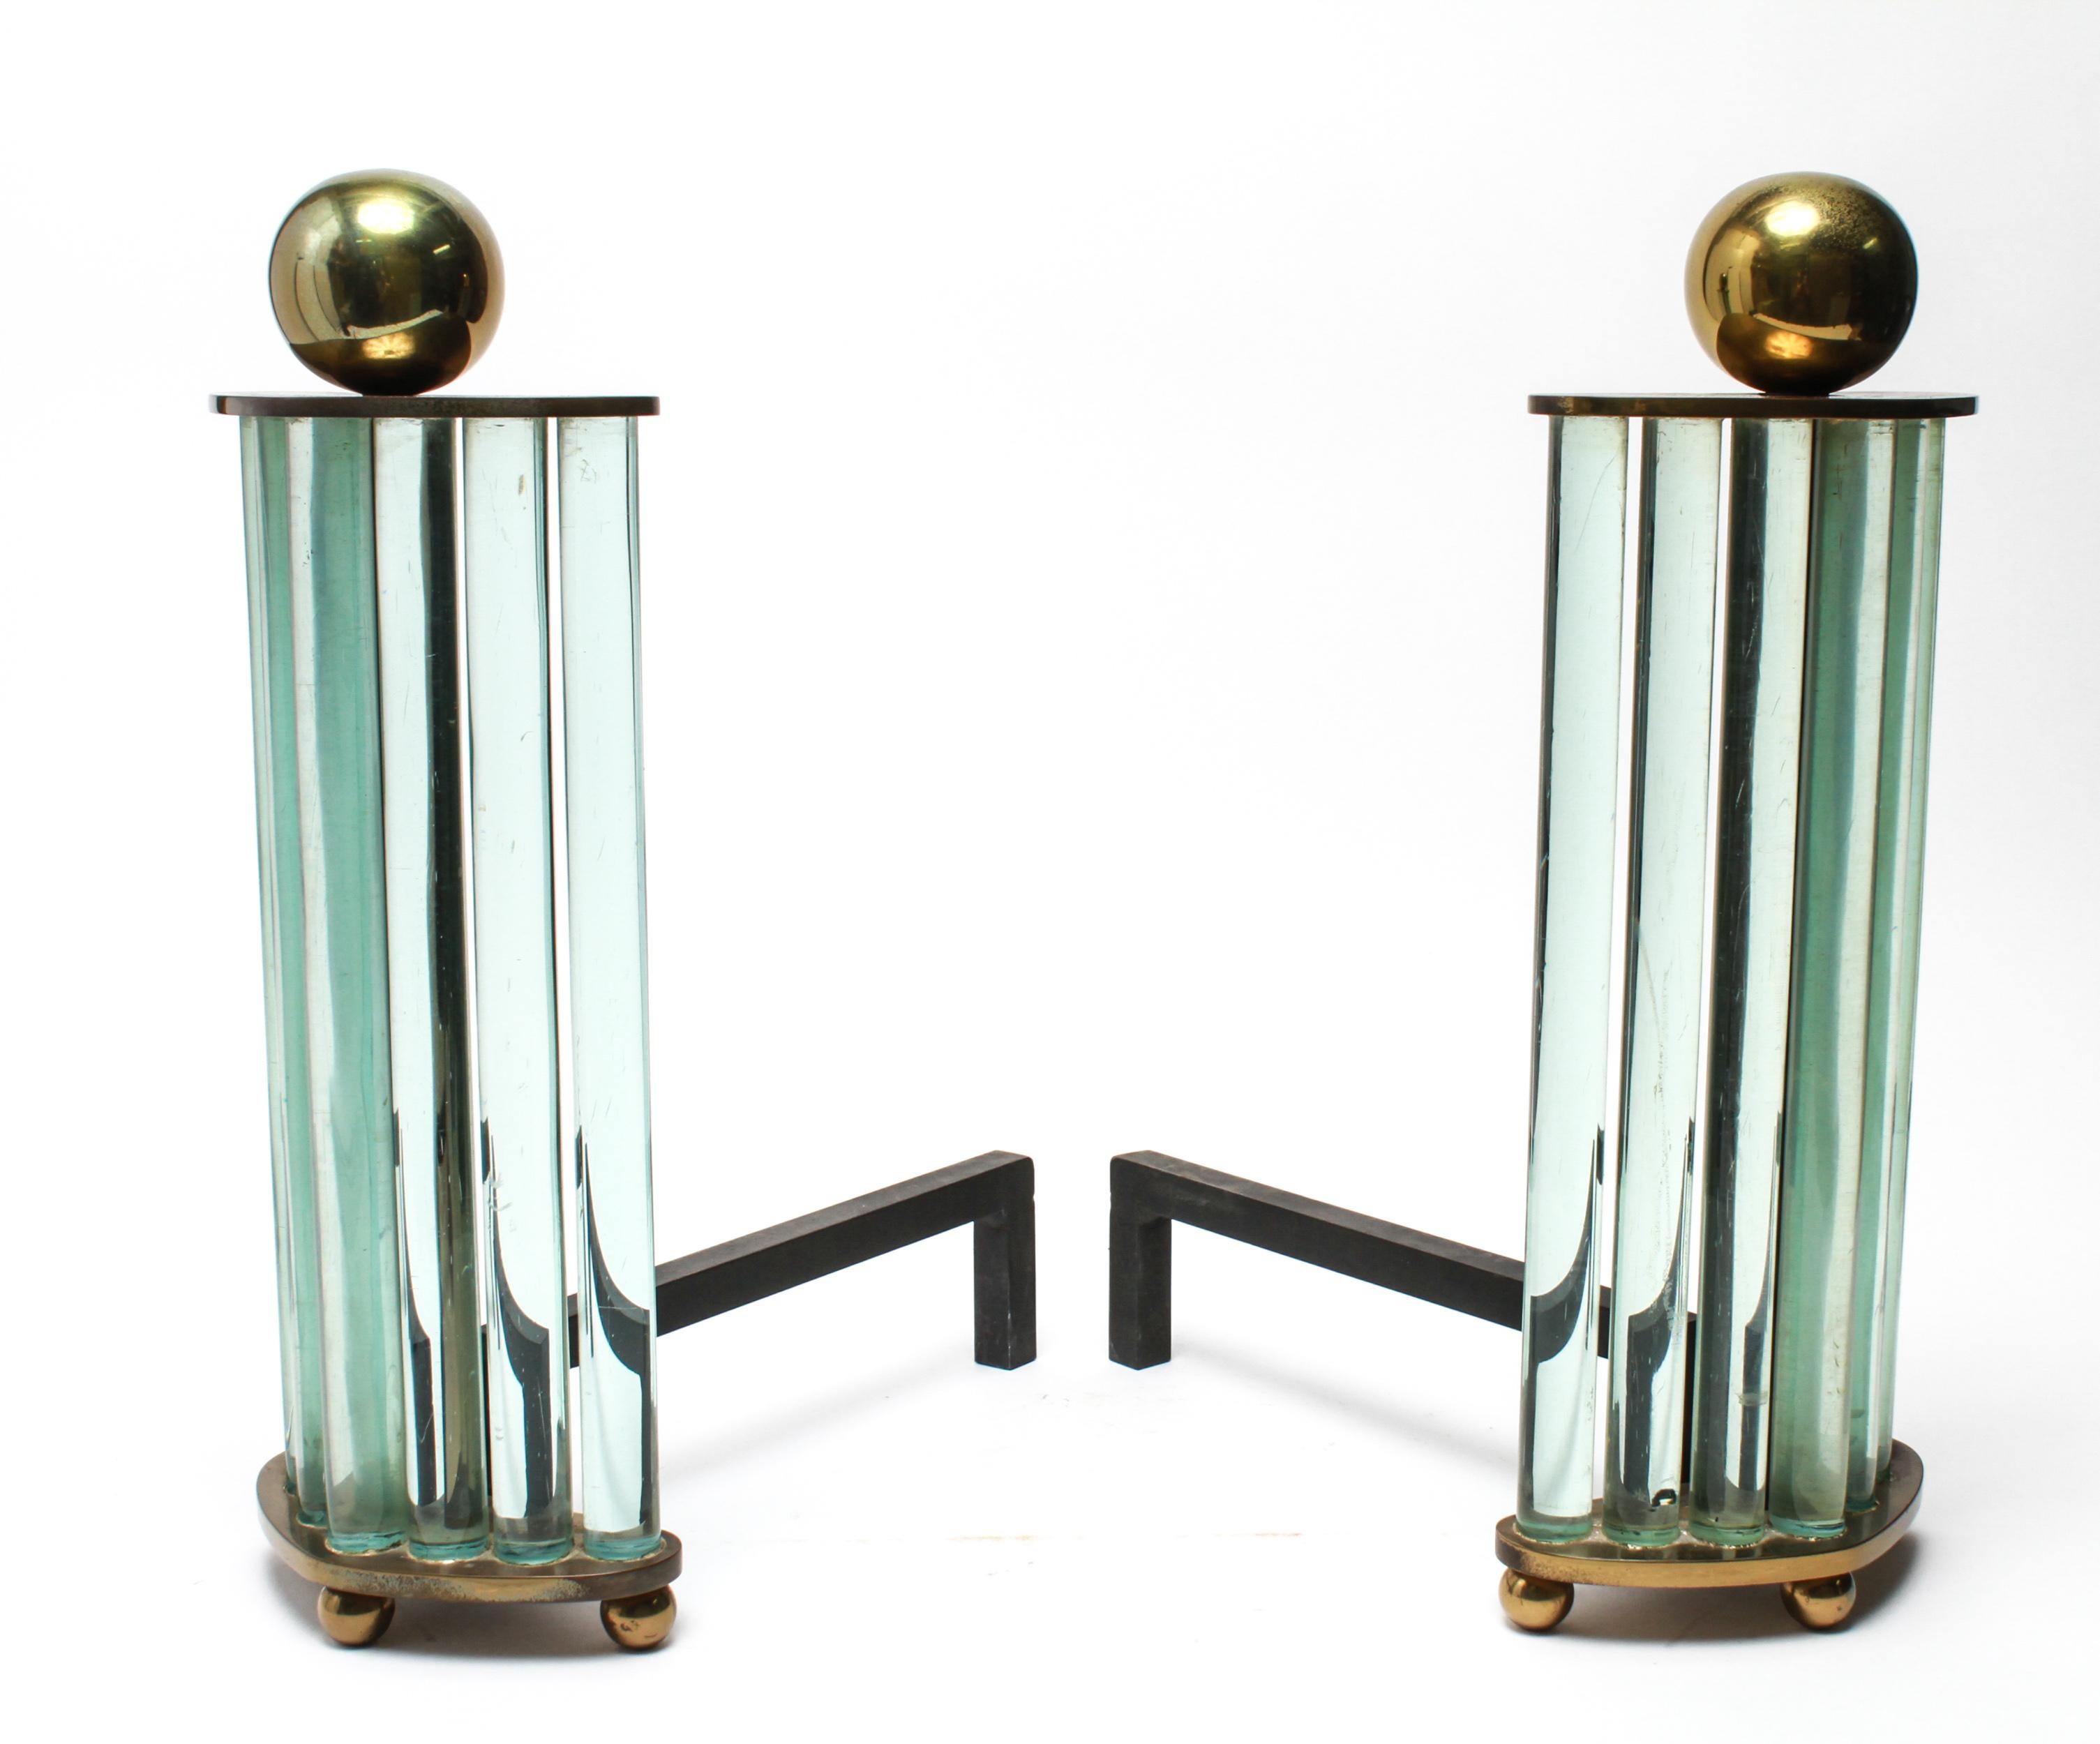 Modernist pair of andirons made by the William H. Jackson Company in New York City. The pair has spherical brass finials atop rising glass rods mounted on a brass base. Maker's label on the underside. In great vintage condition with age-appropriate